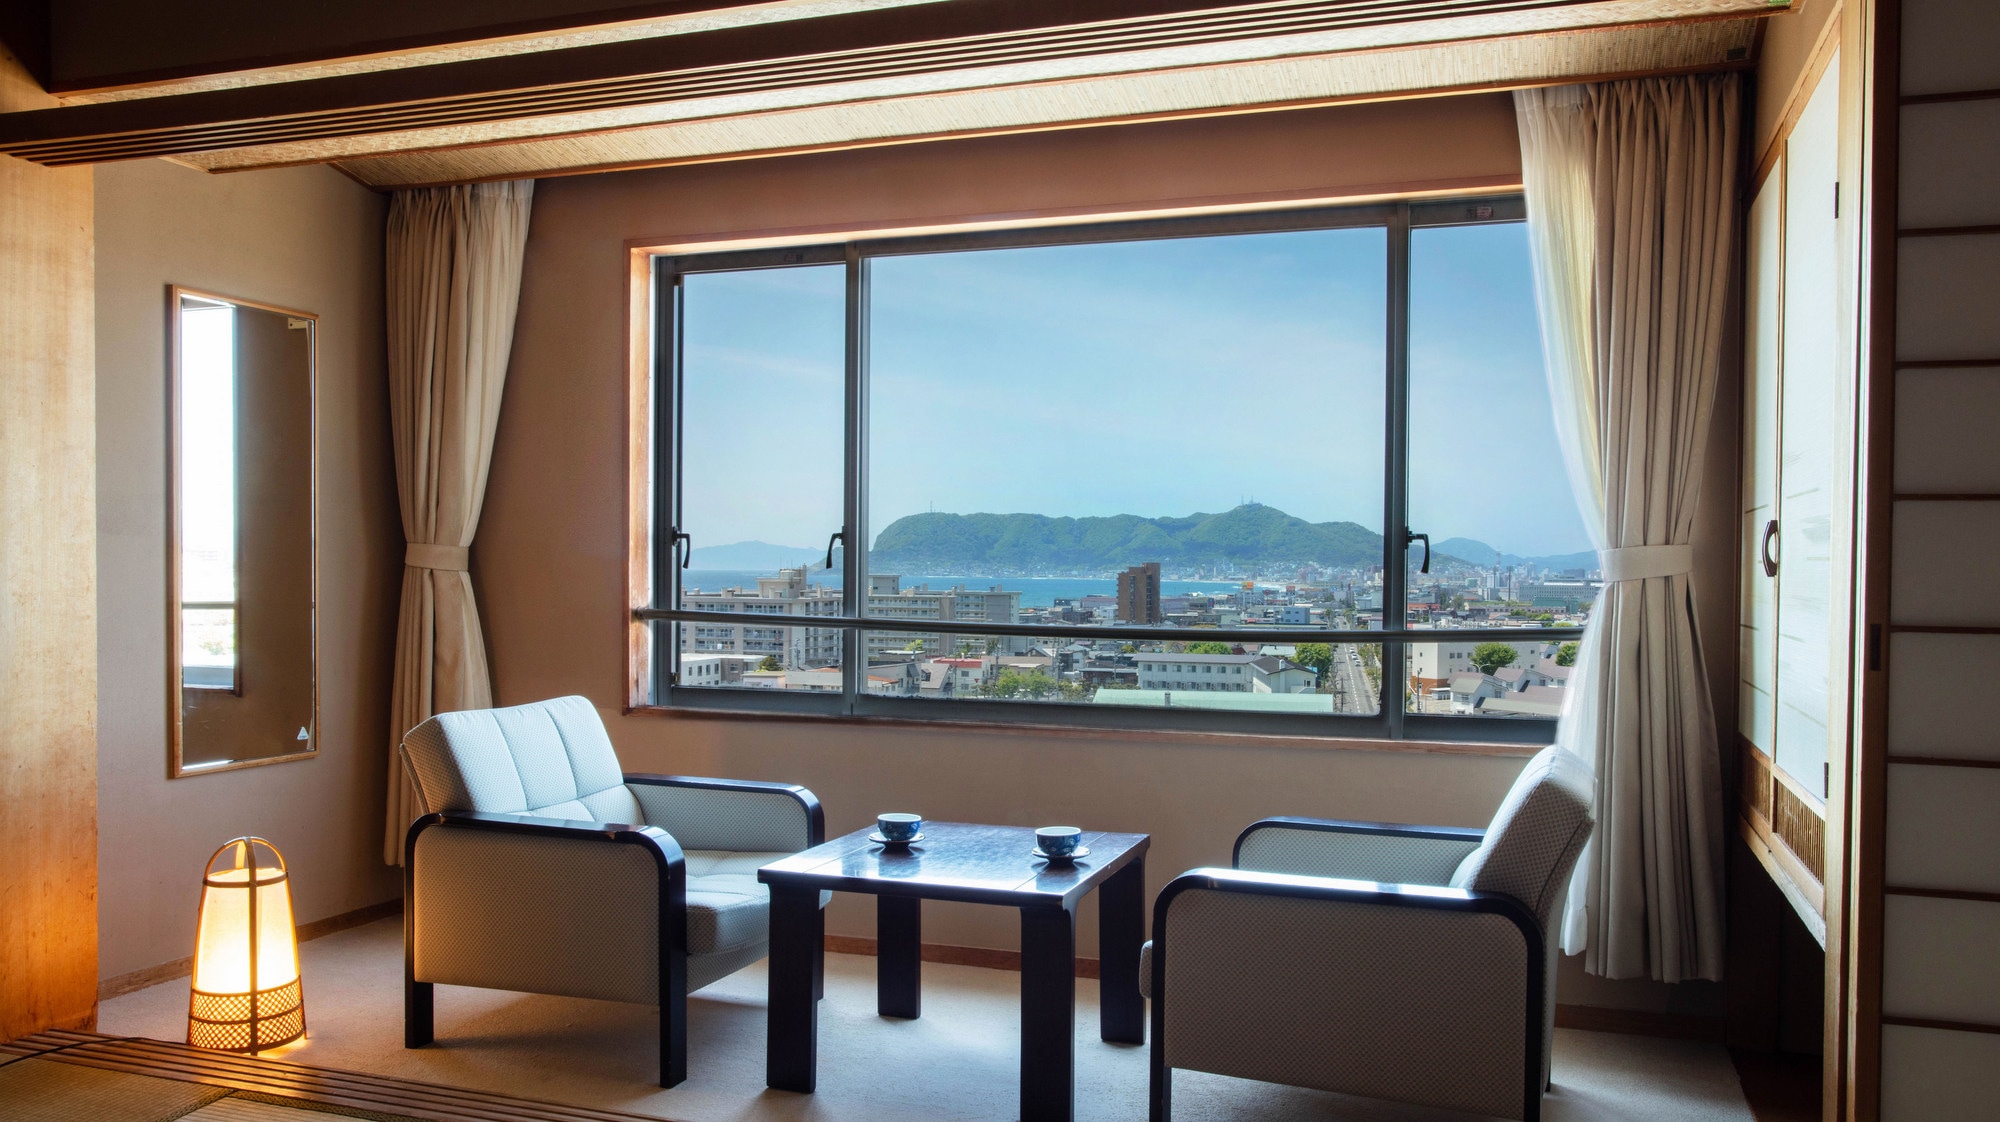 [High floor floor] This room is recommended for those who want to relax and enjoy the view.